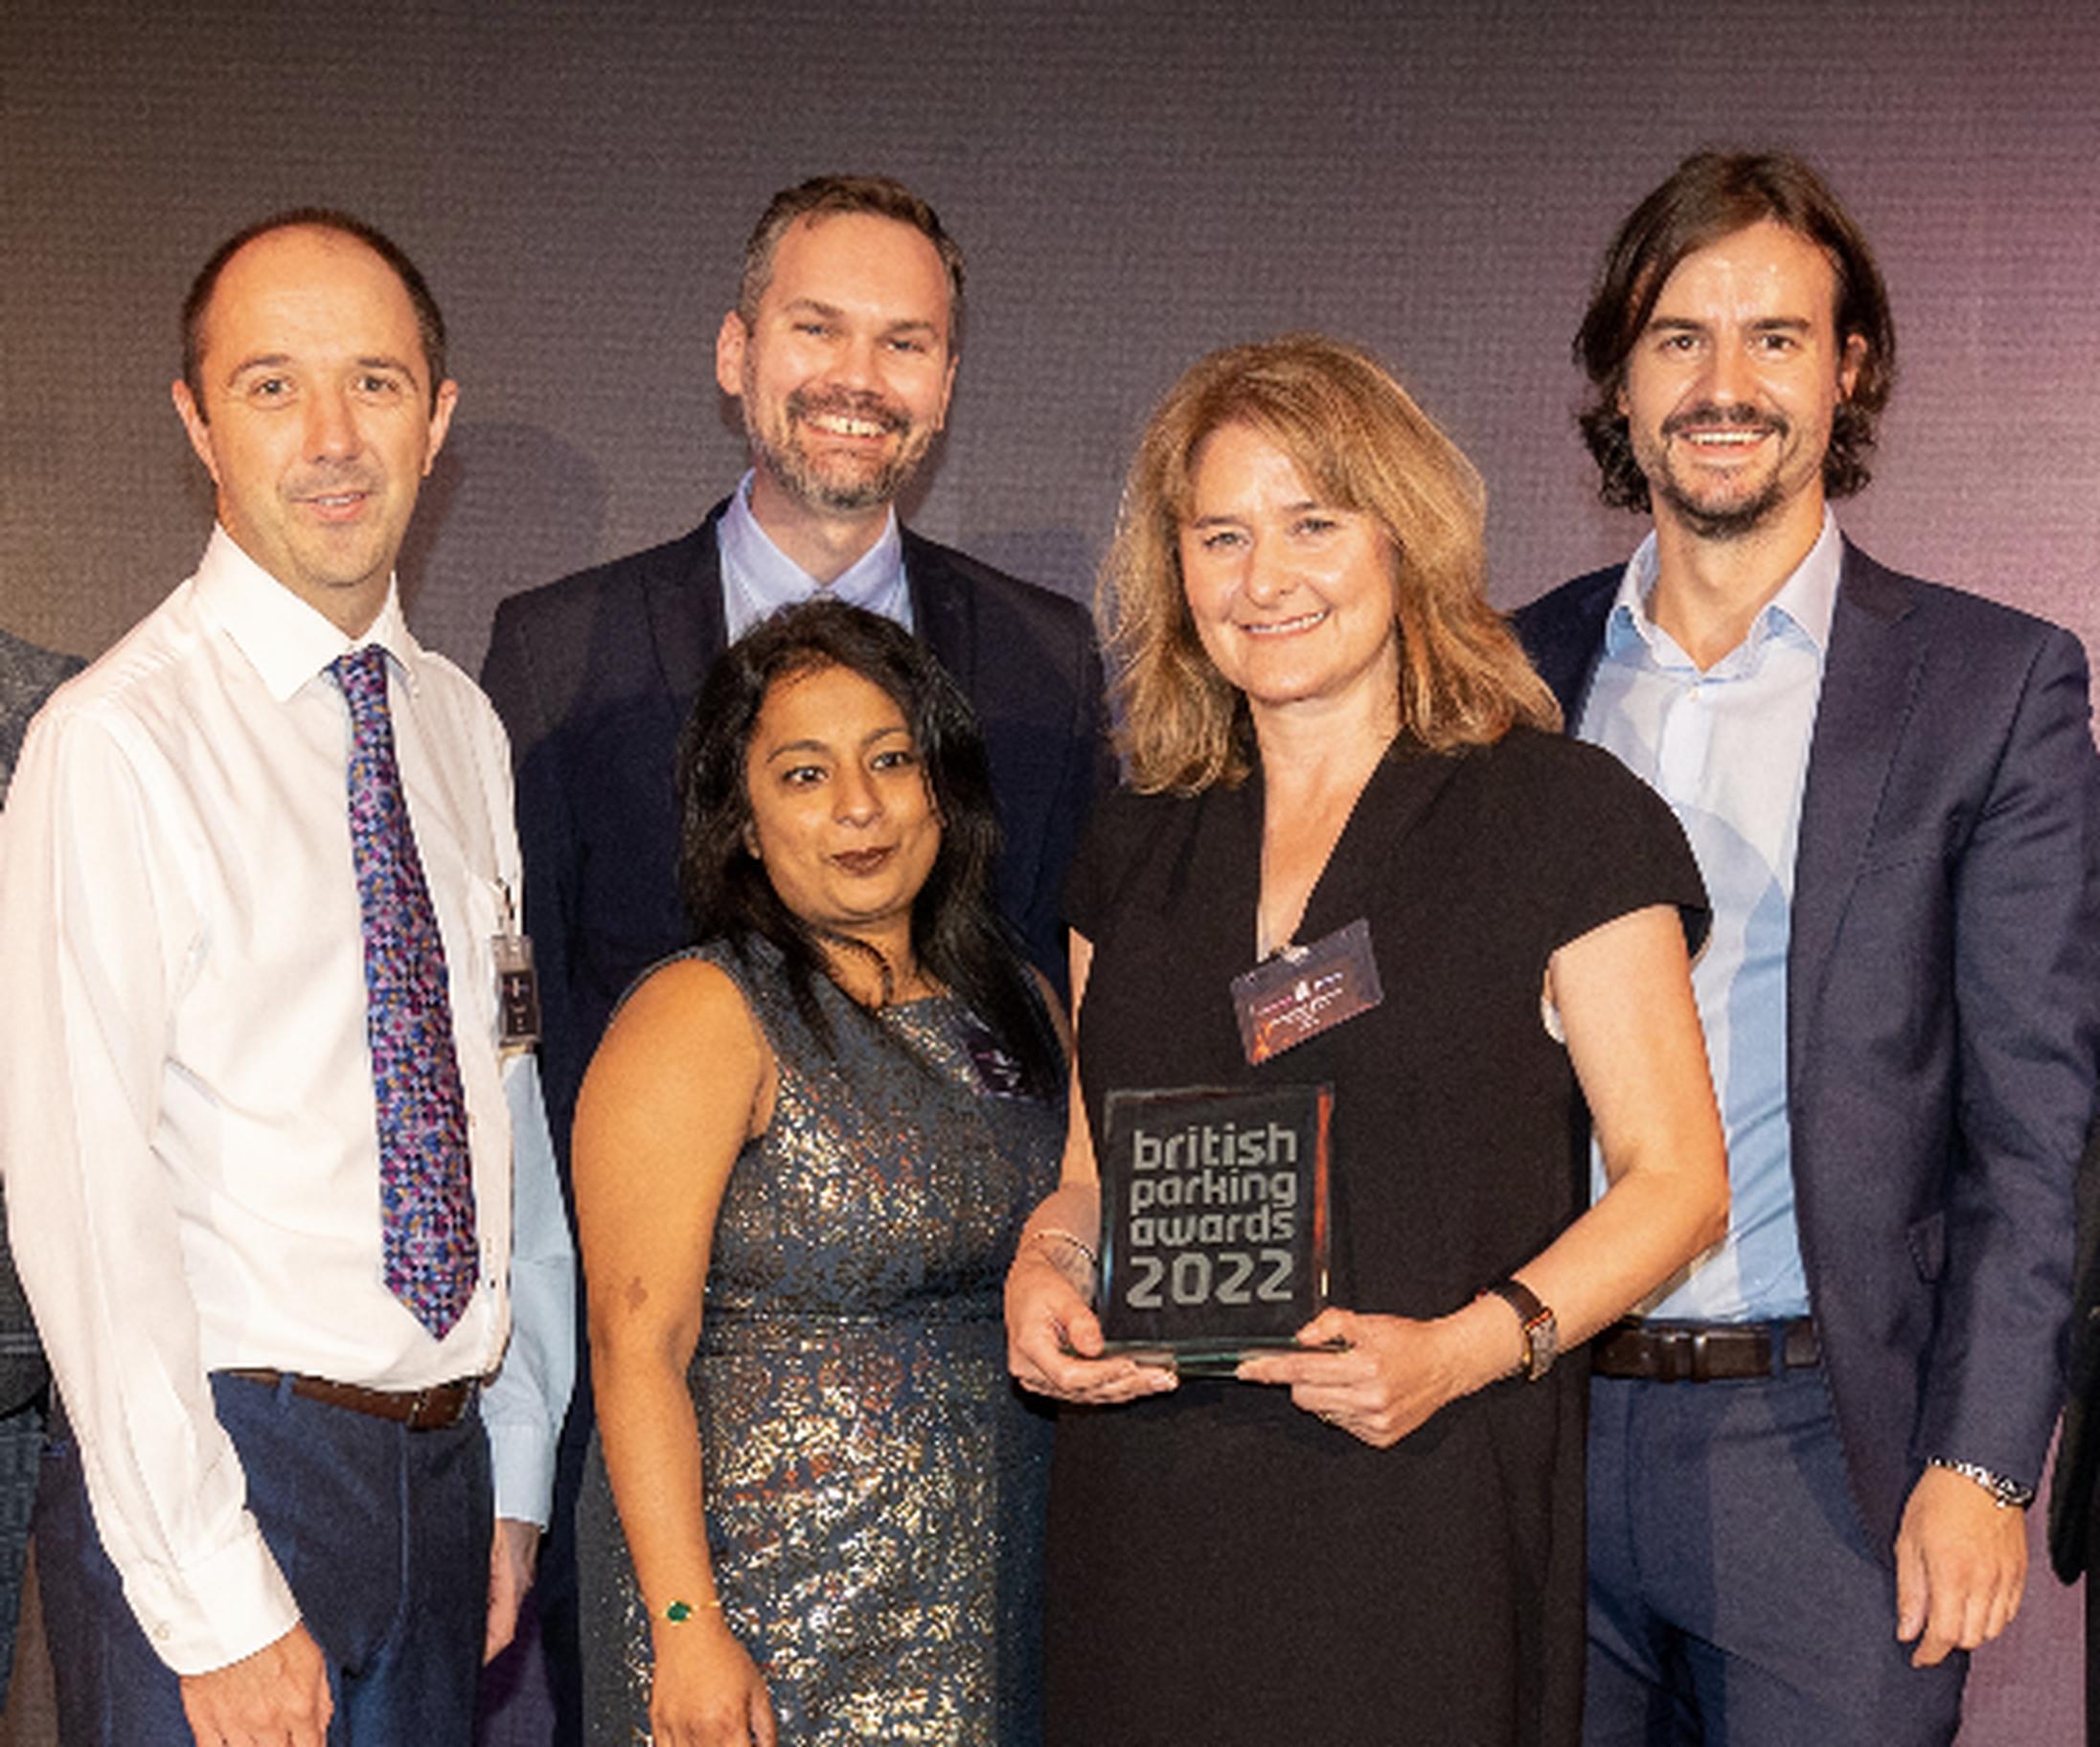 WSP Liveable Streets’ TRO team was named Team of the Year at the British Parking Awards 2022